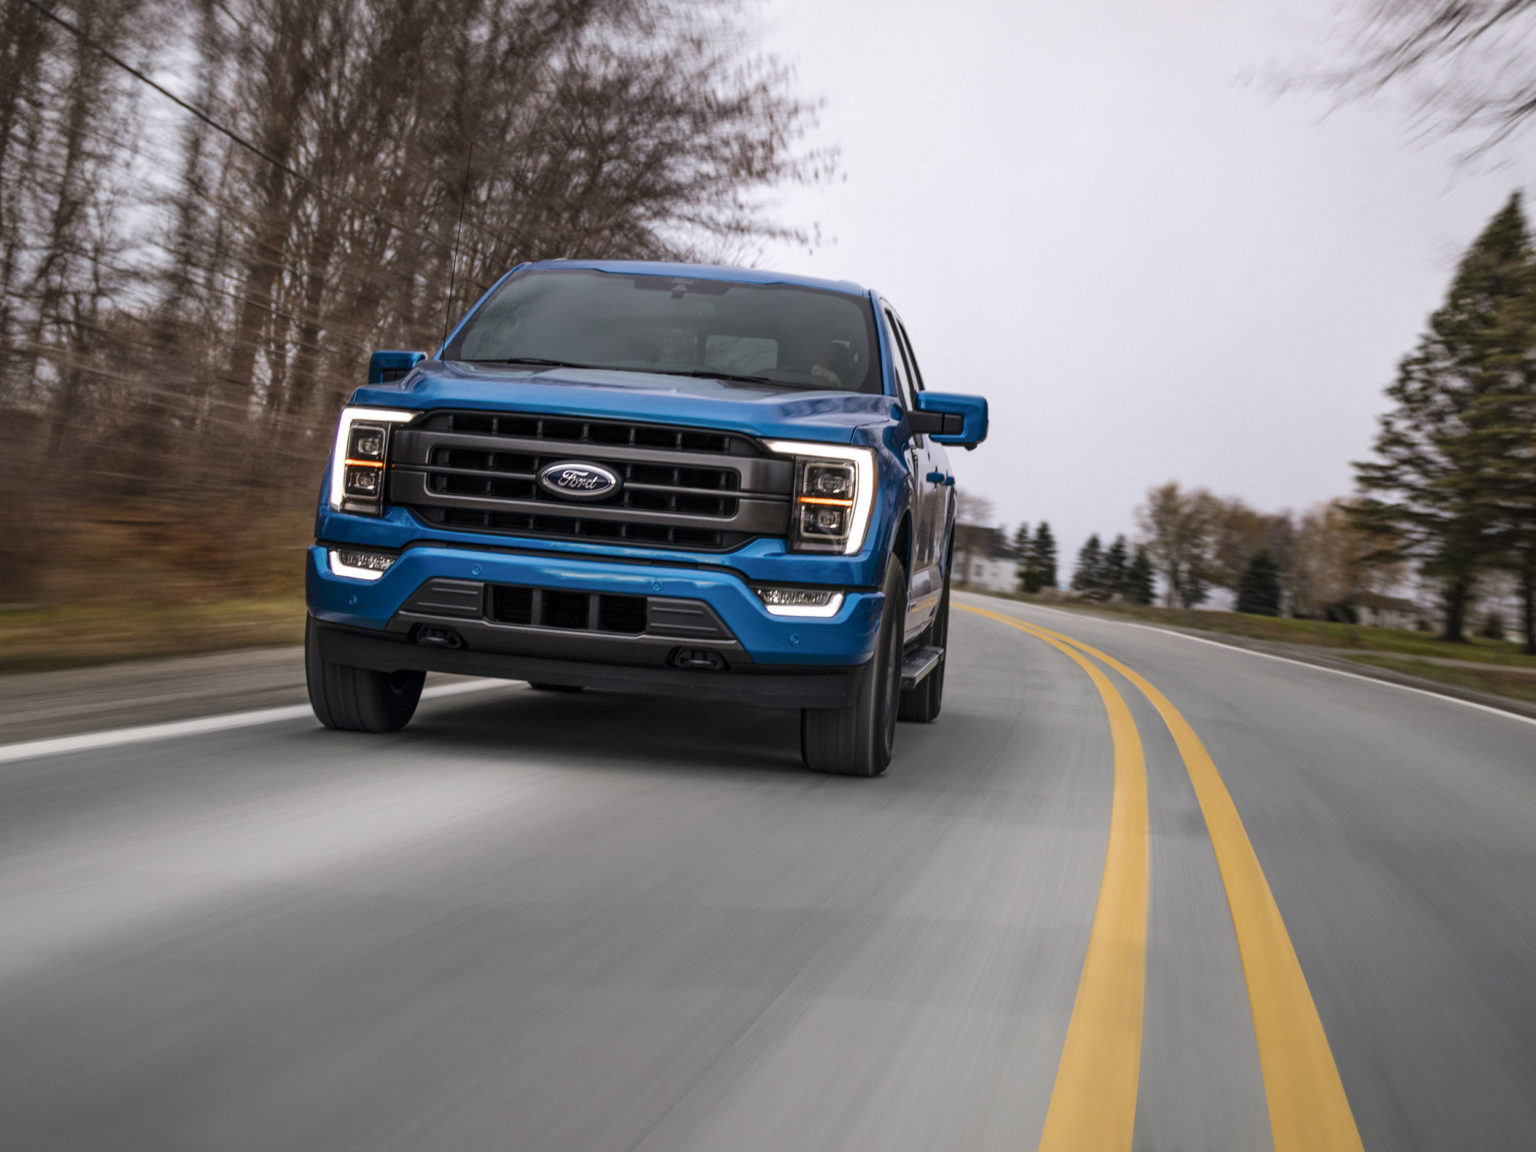 The 2021 F-150 Hybrid is the company's most fuel-efficient full-size truck sold in the U.S.